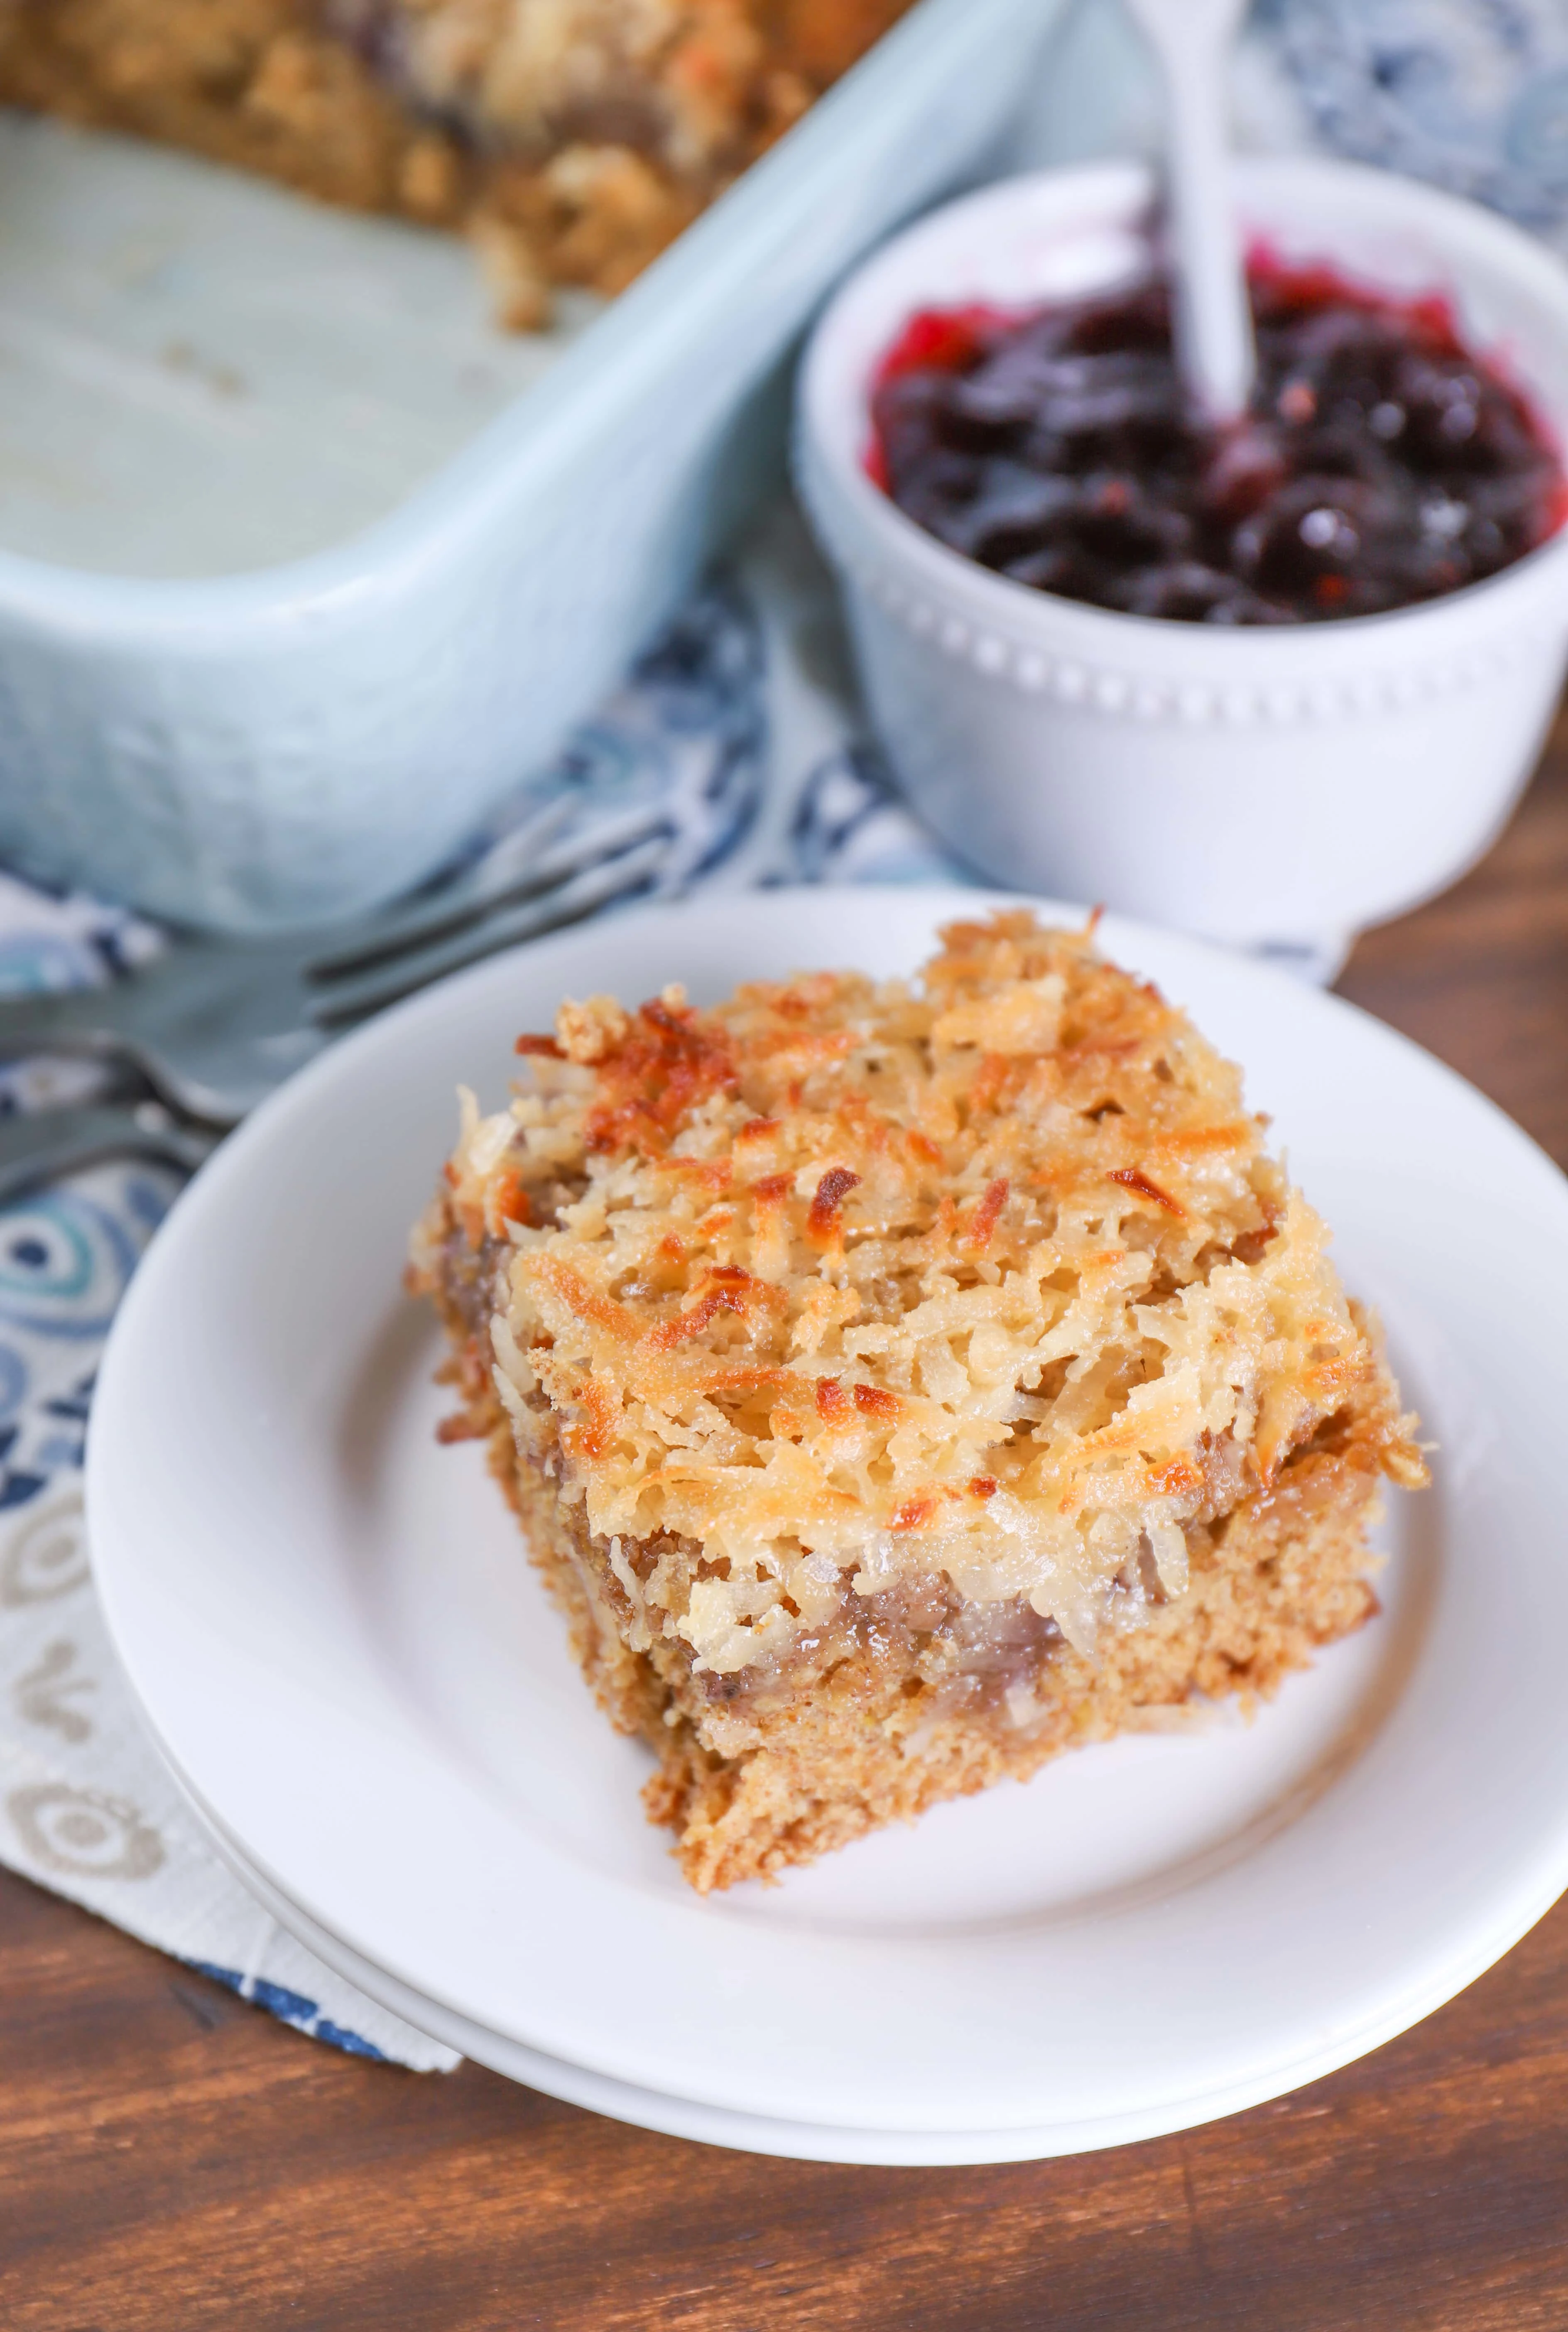 Old Fashioned Caramel Broiled Berry Oatmeal Cake